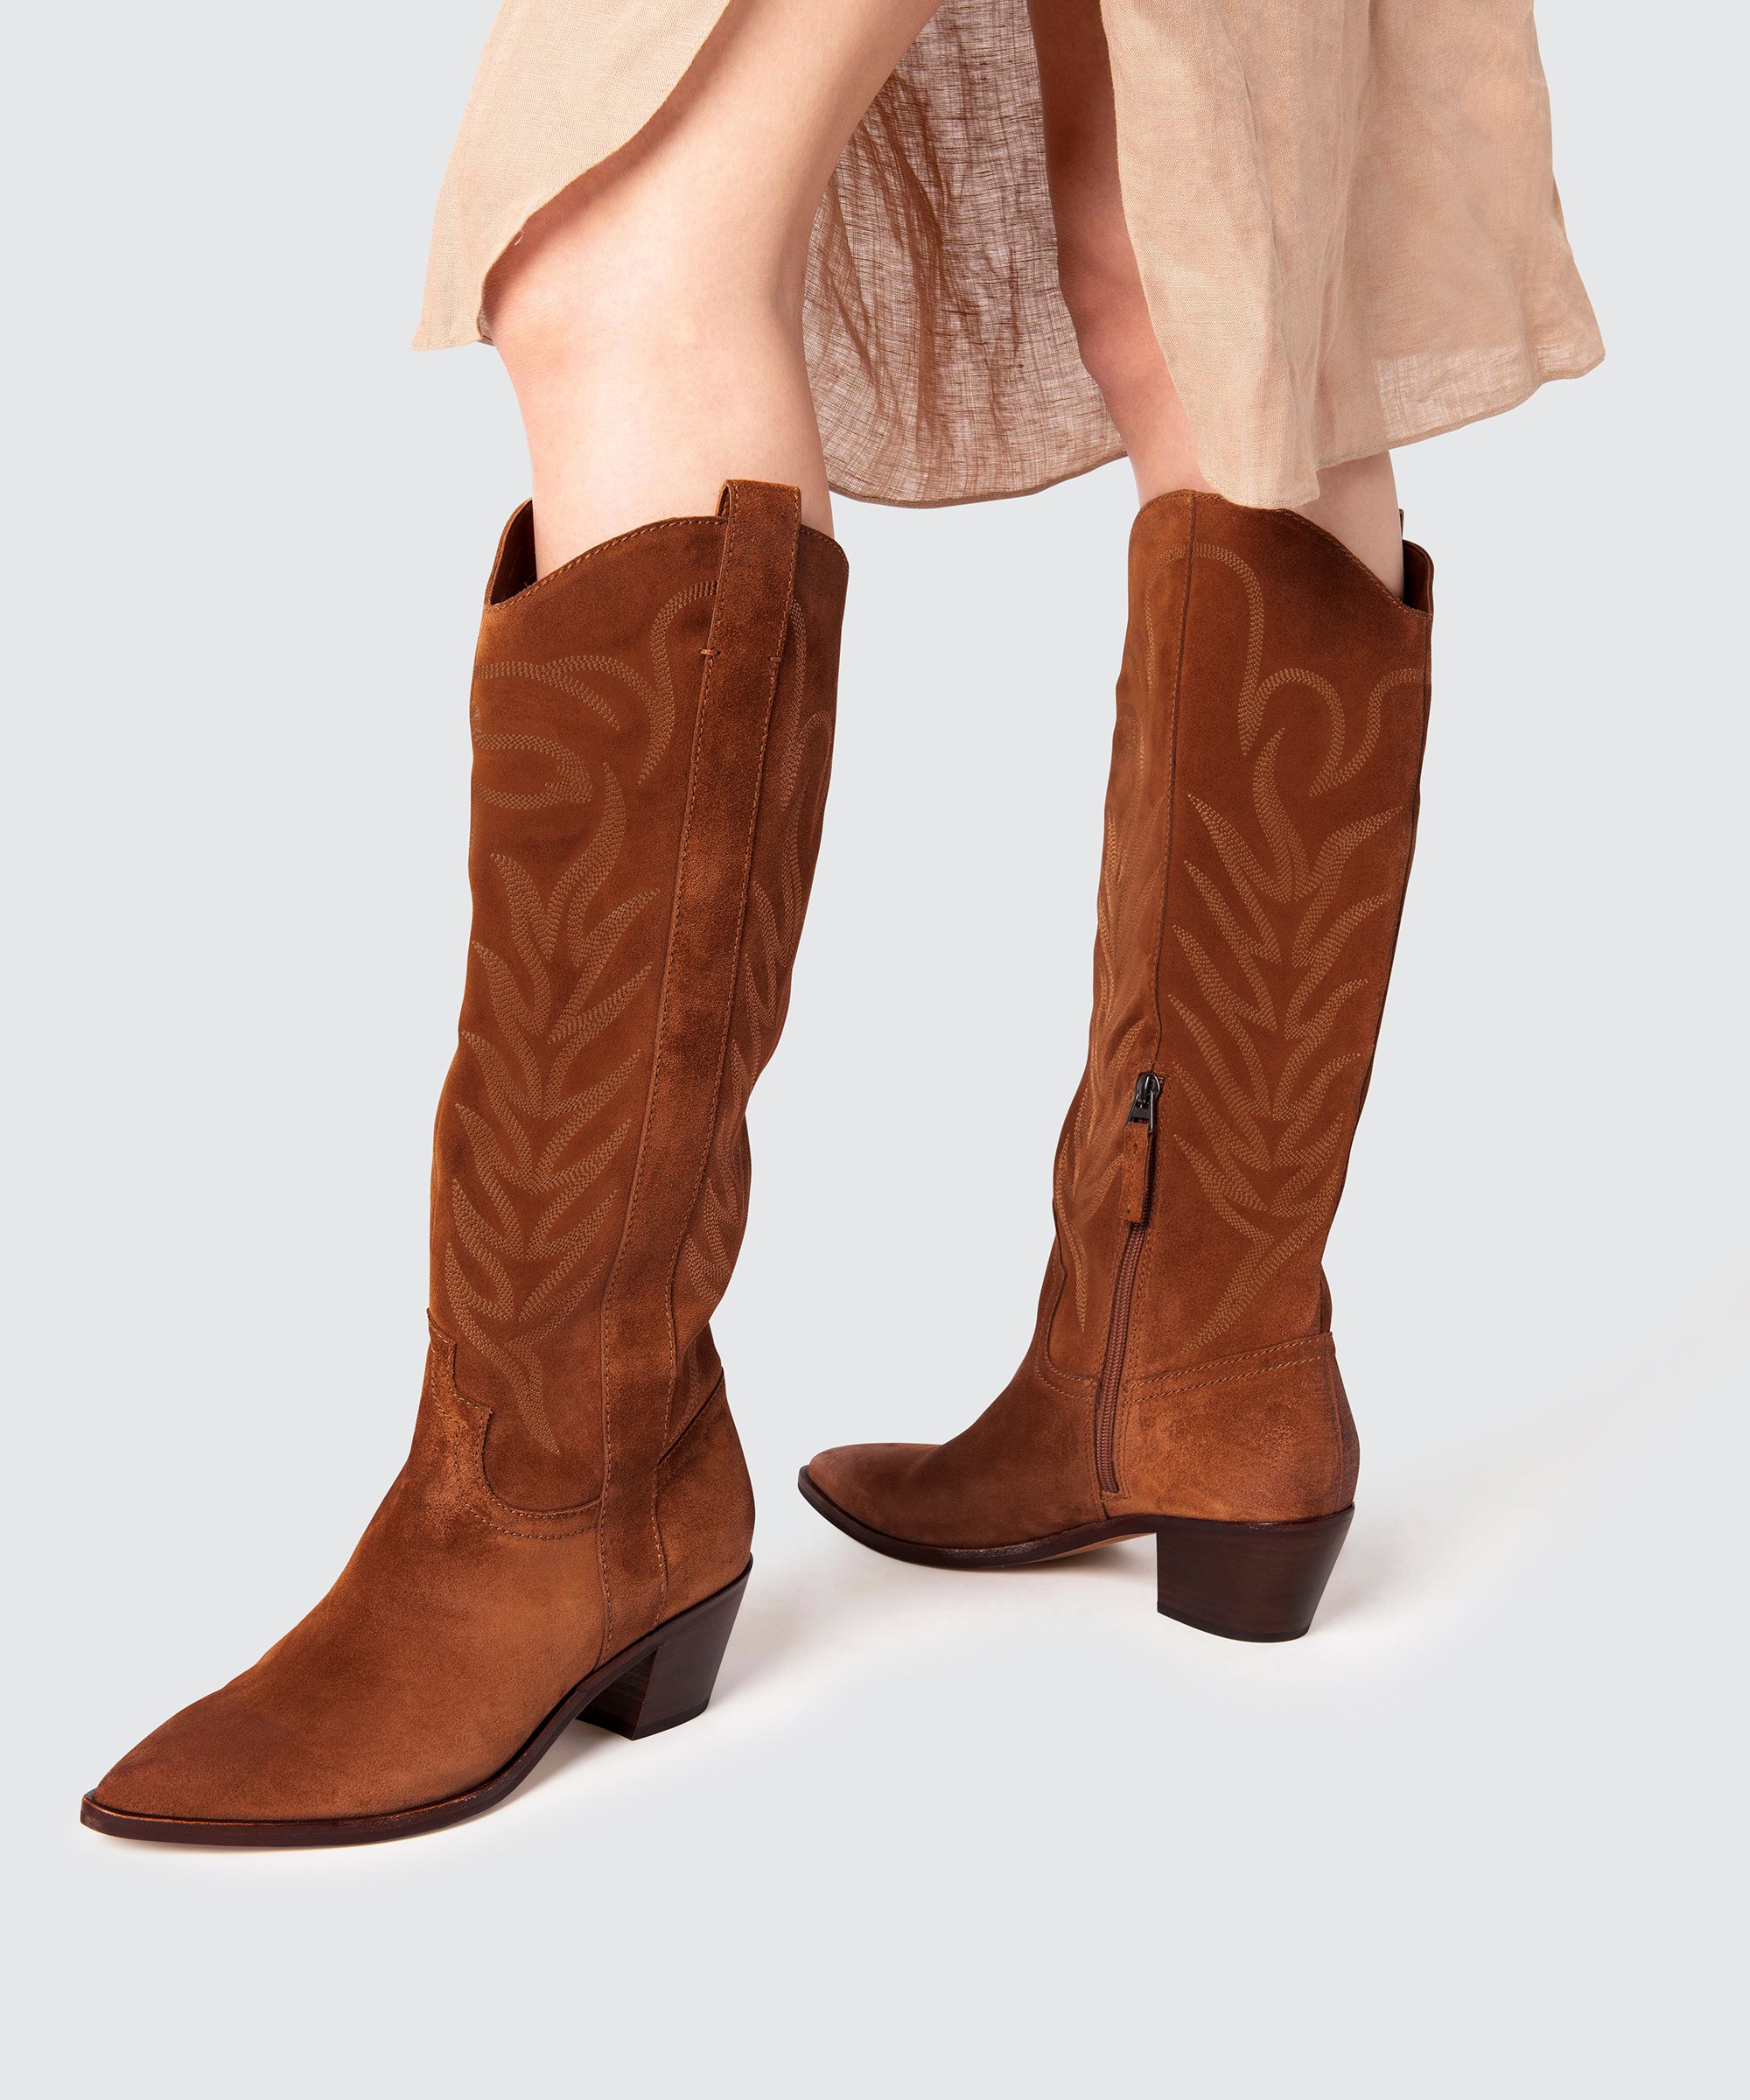 SOLEI BOOTS IN BROWN – Dolce Vita